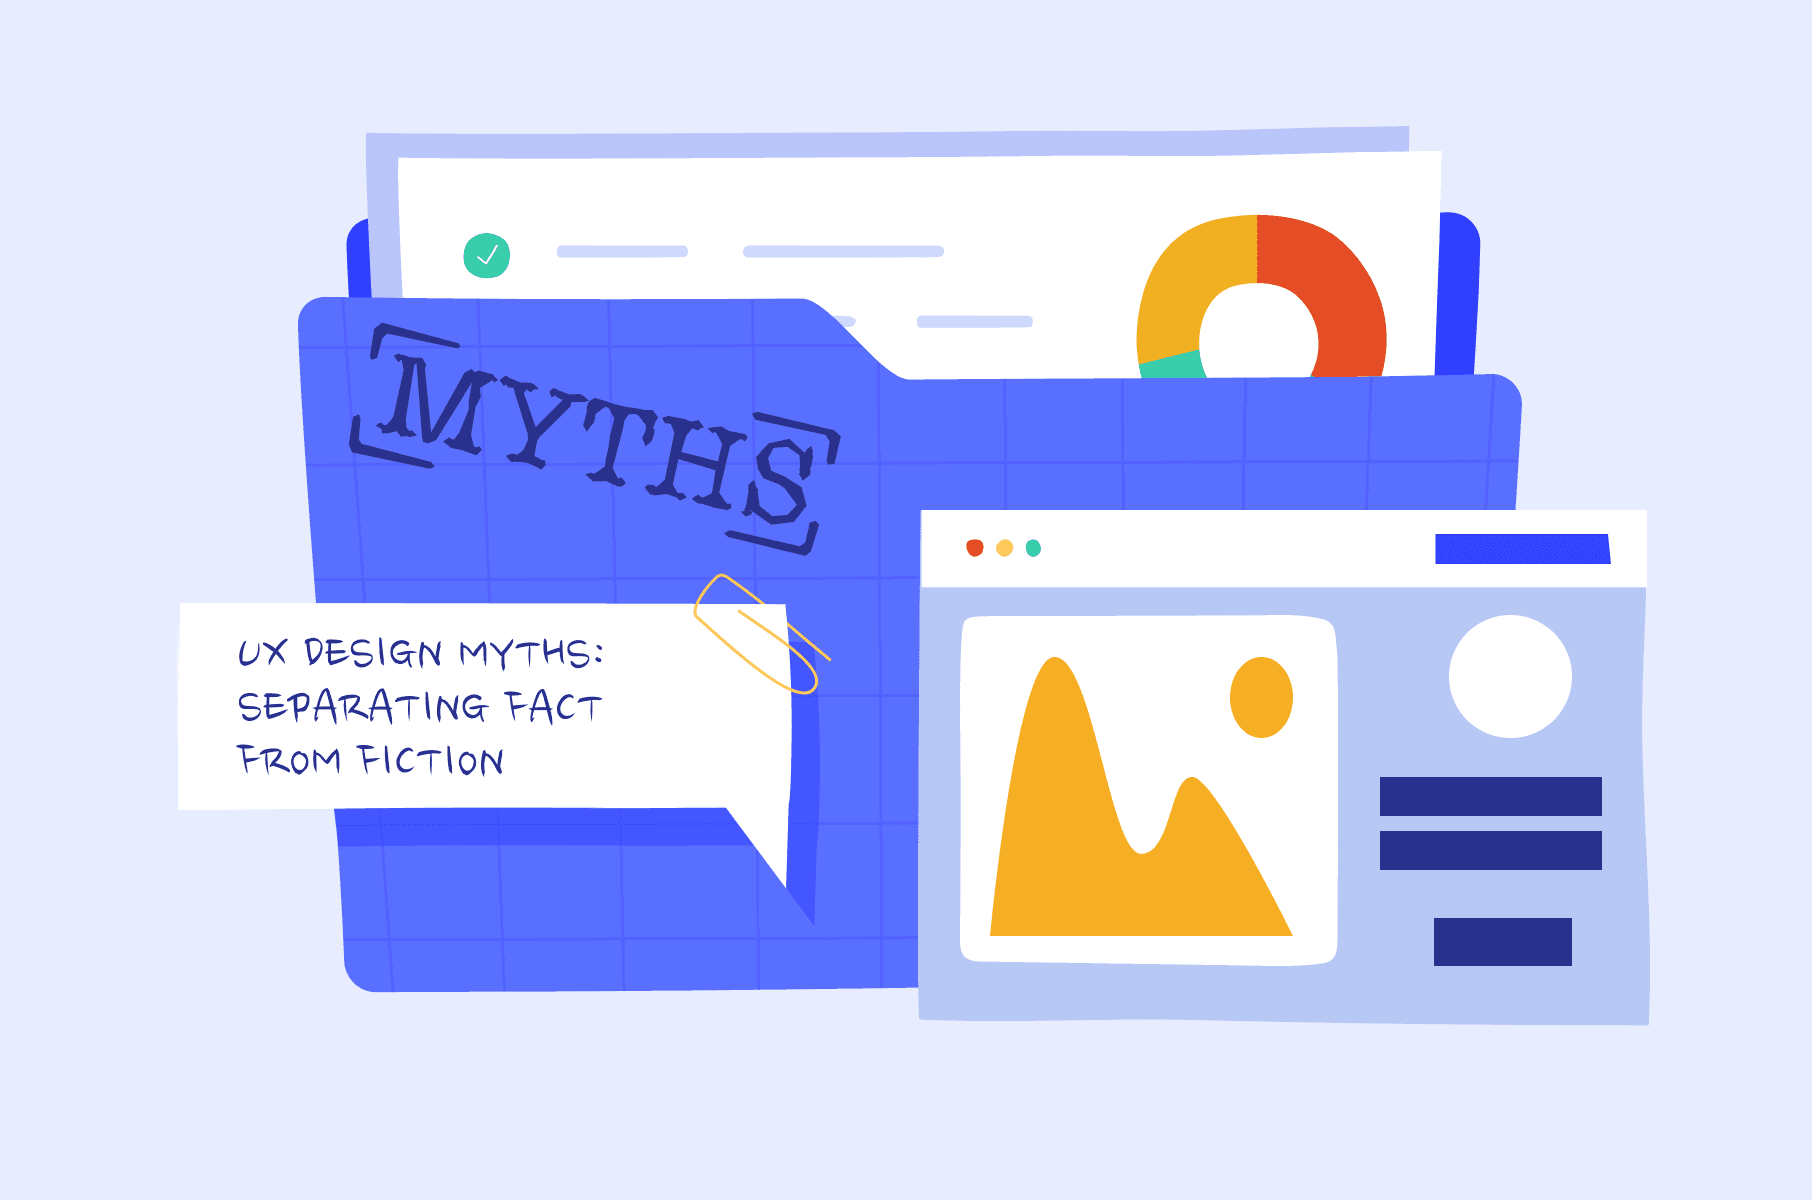 UX design myths: separating fact from fiction